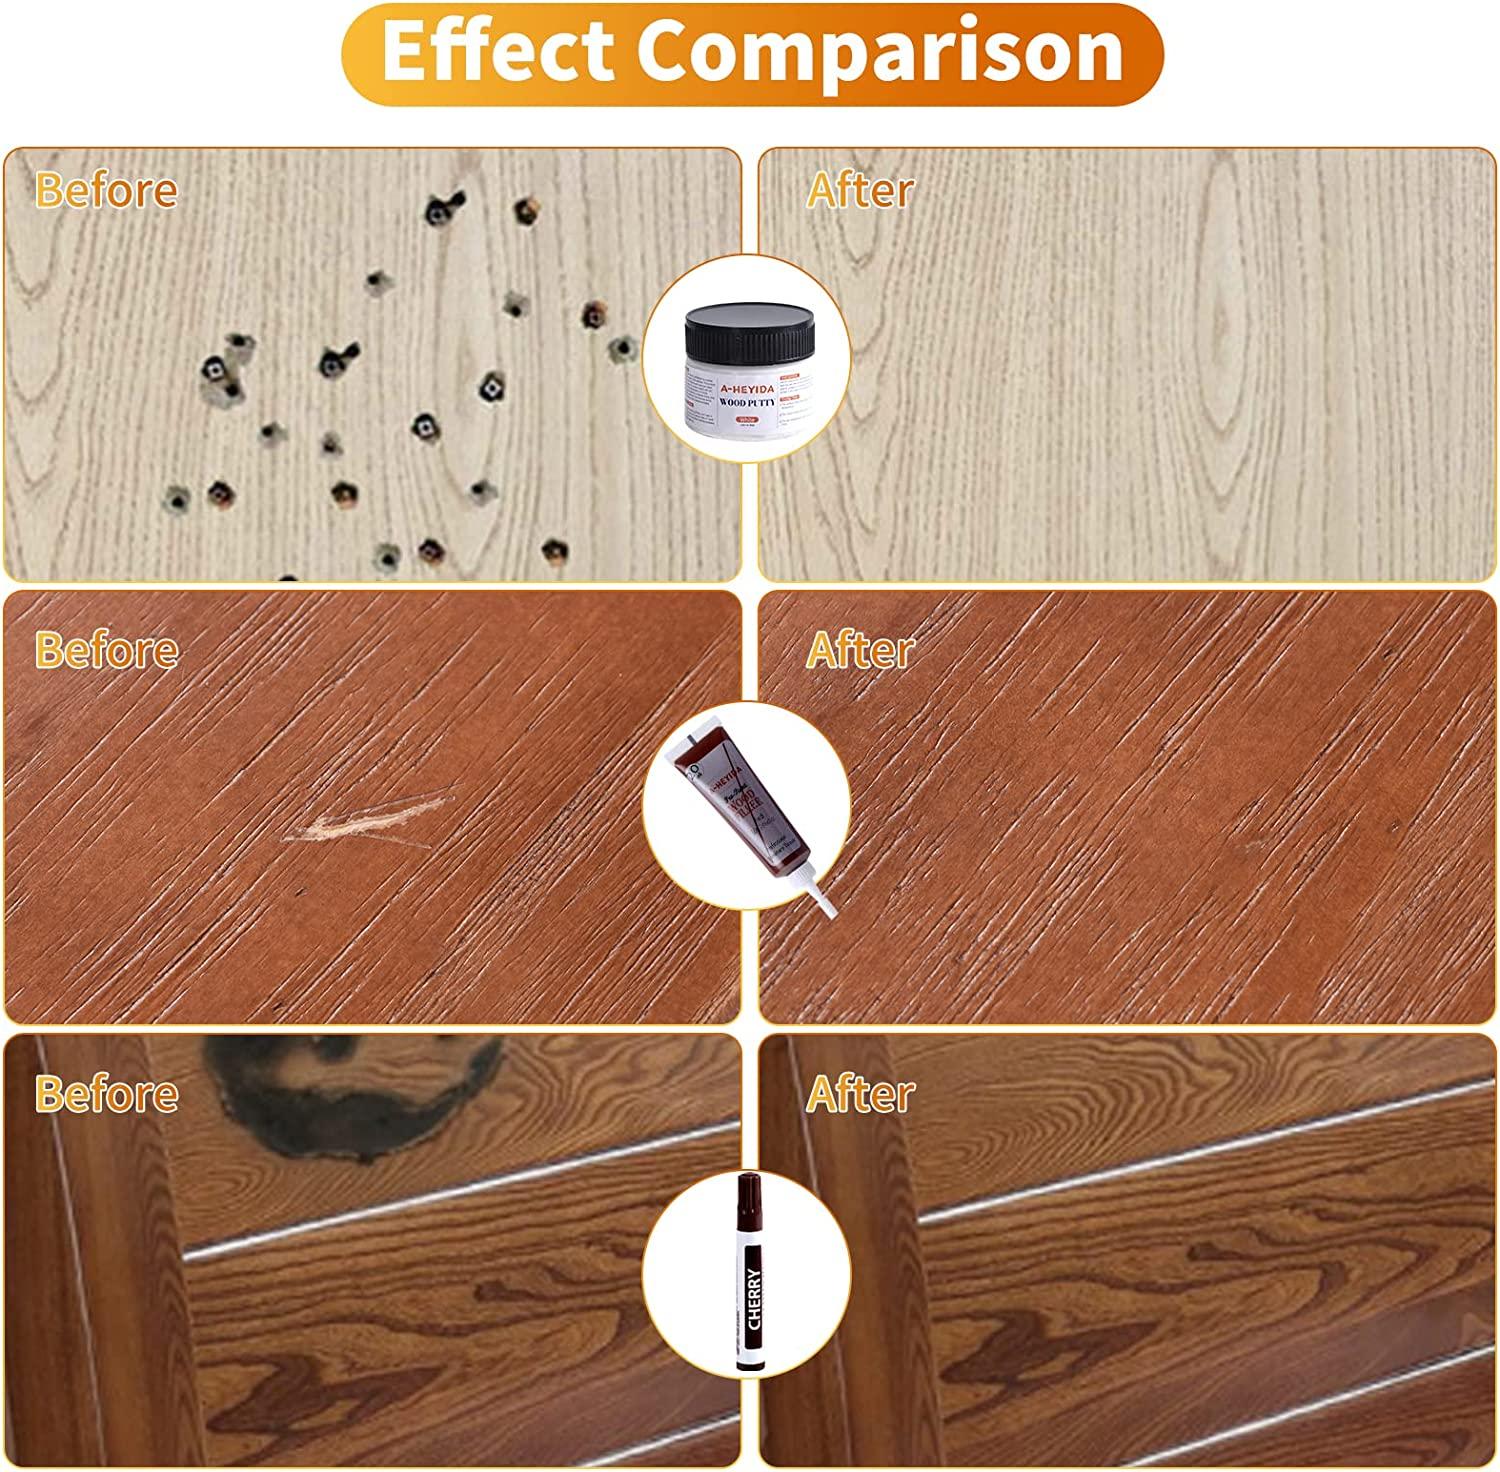  Wood Furniture Repair Marker Pen, Wood Furniture Scratch Repair  Touch Up Pen, Paint Fix Filler for Stains, Scratches, Wood Floors, Tables,  Desks(Black) : Health & Household